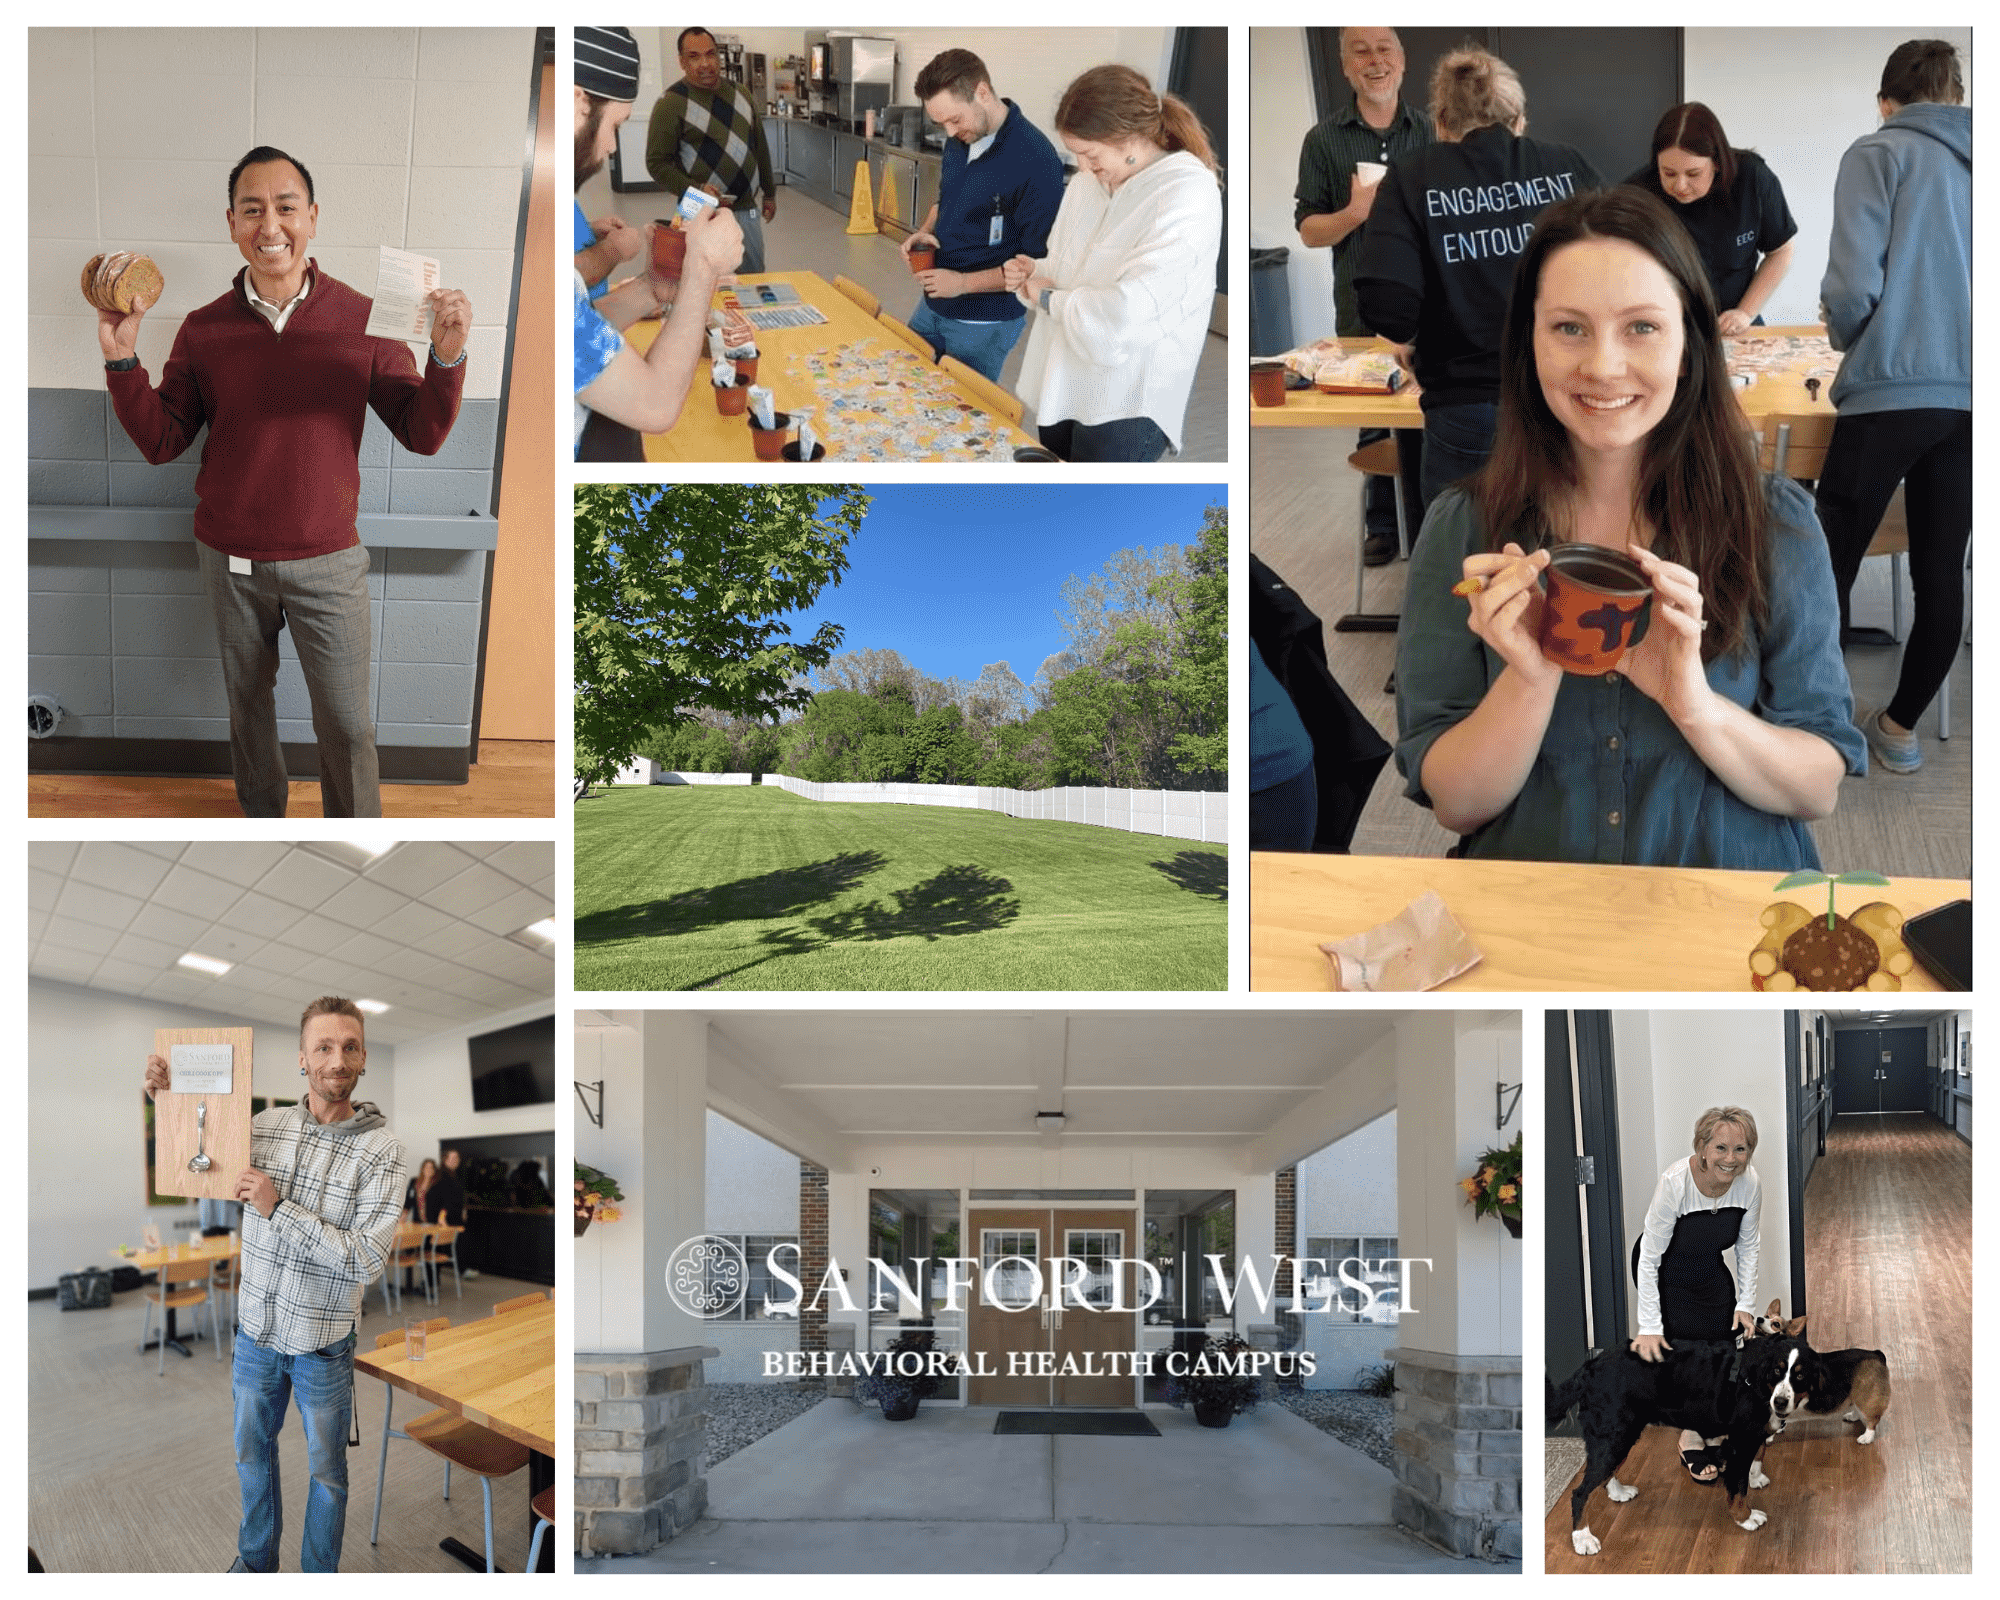 Our philosophy is work hard, team build hard! We celebrate Earth Day, Employee Appreciation Day, and put on cook-offs and other events to connect team members who may not see each other every day.